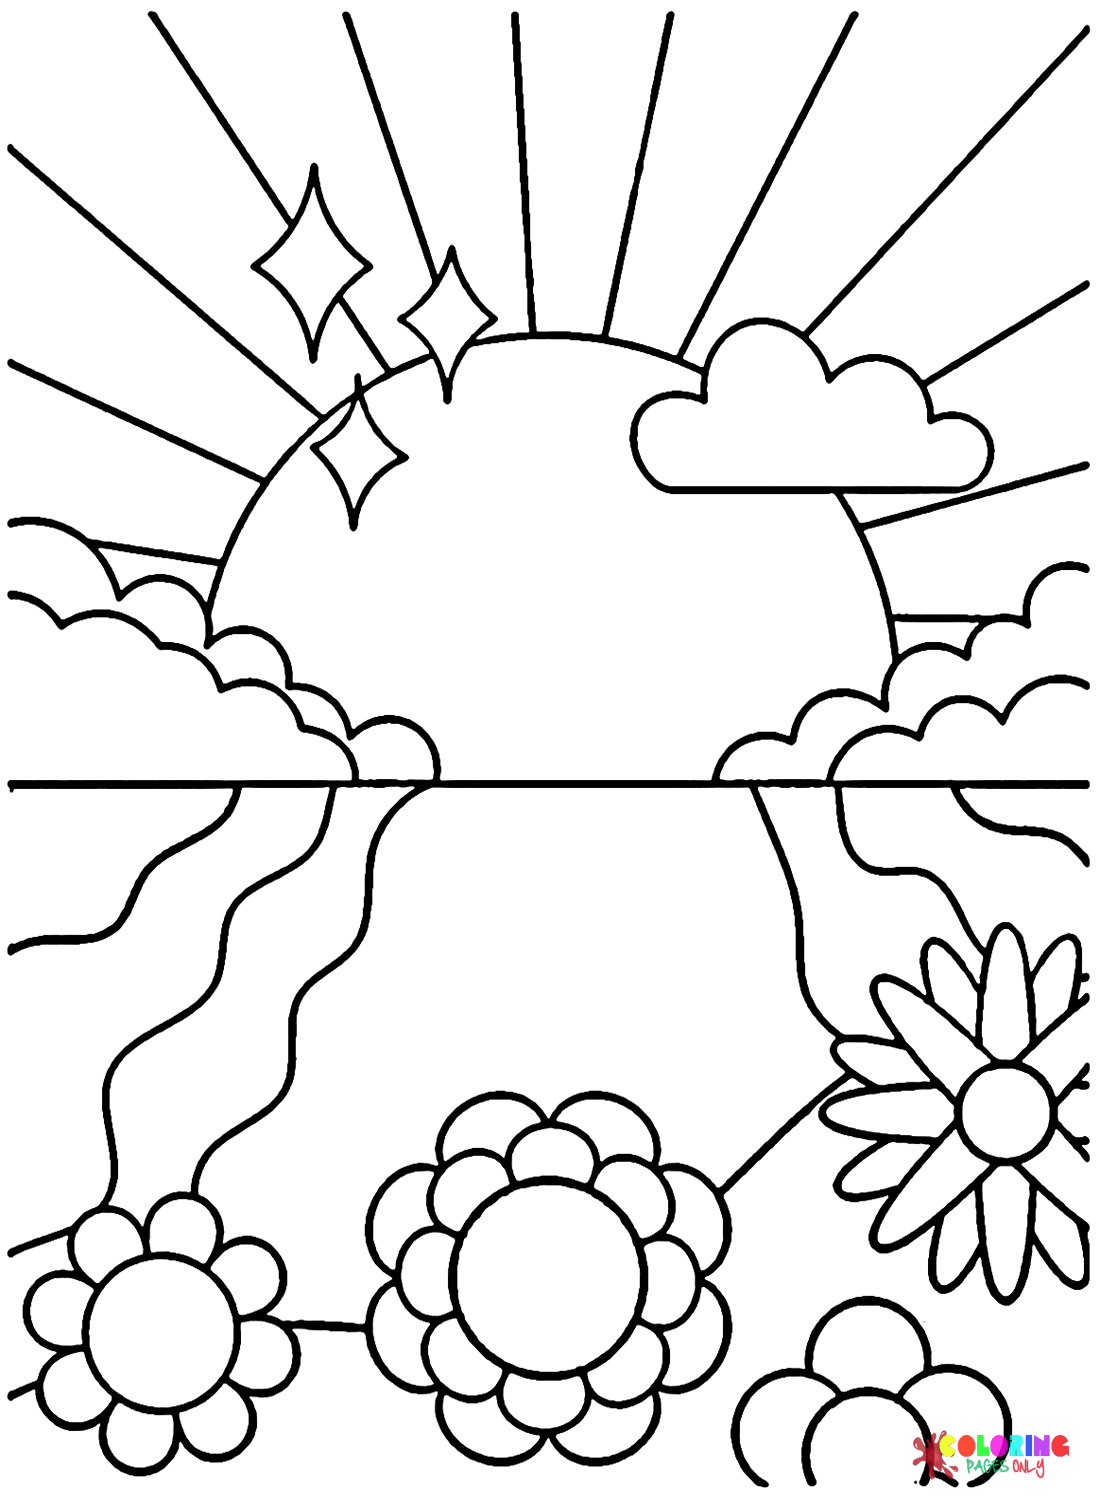 Hippie Coloring Pages Printable for Free Download